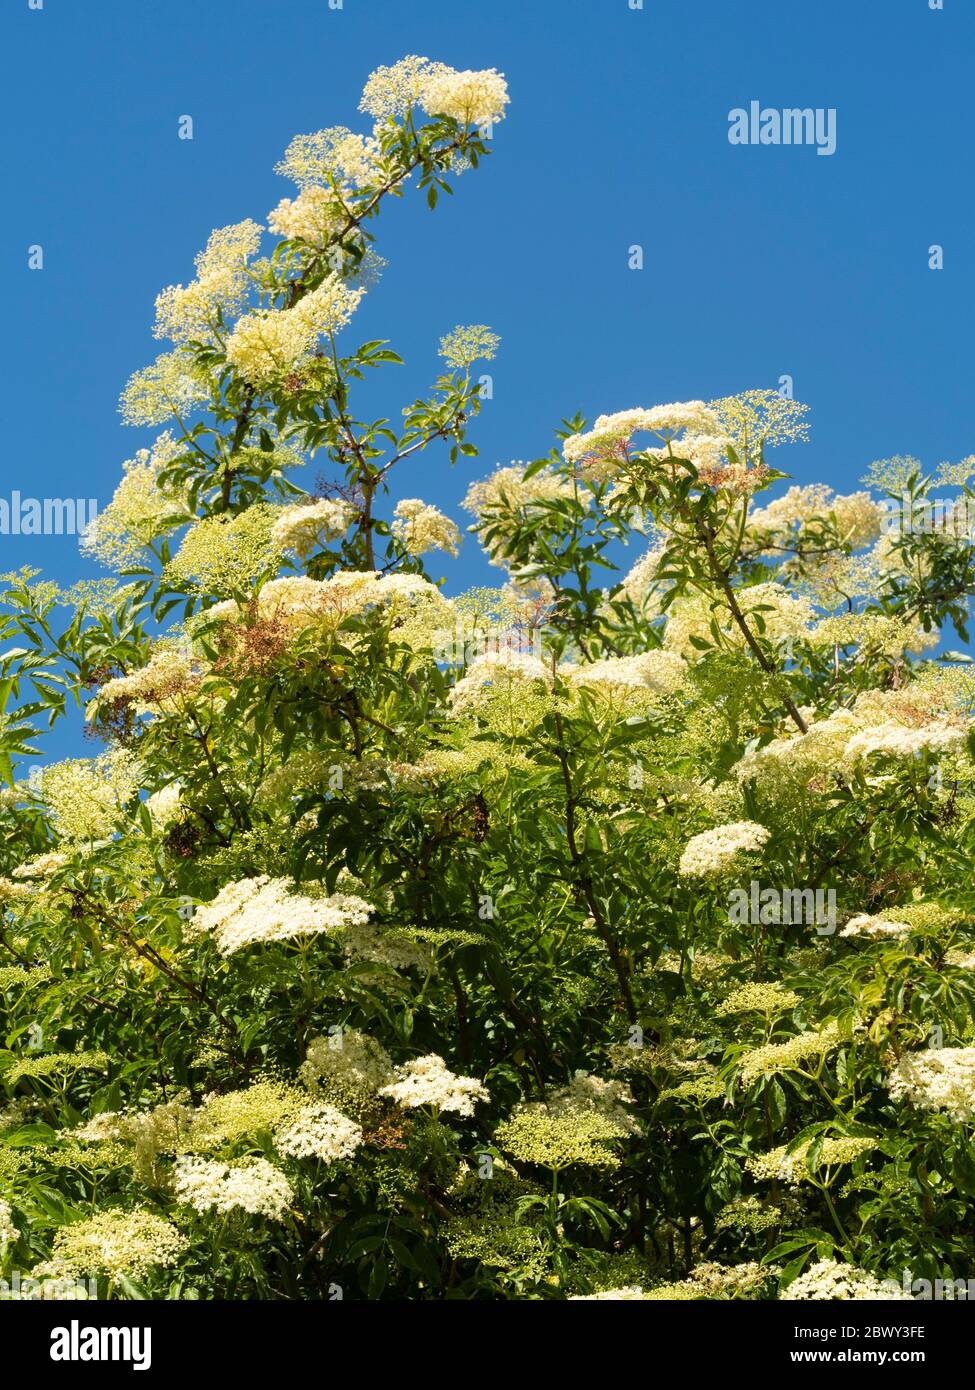 Frothy white flower heads of elder, Sambucus nigra, against a blue May sky above a UK hedgerow Stock Photo